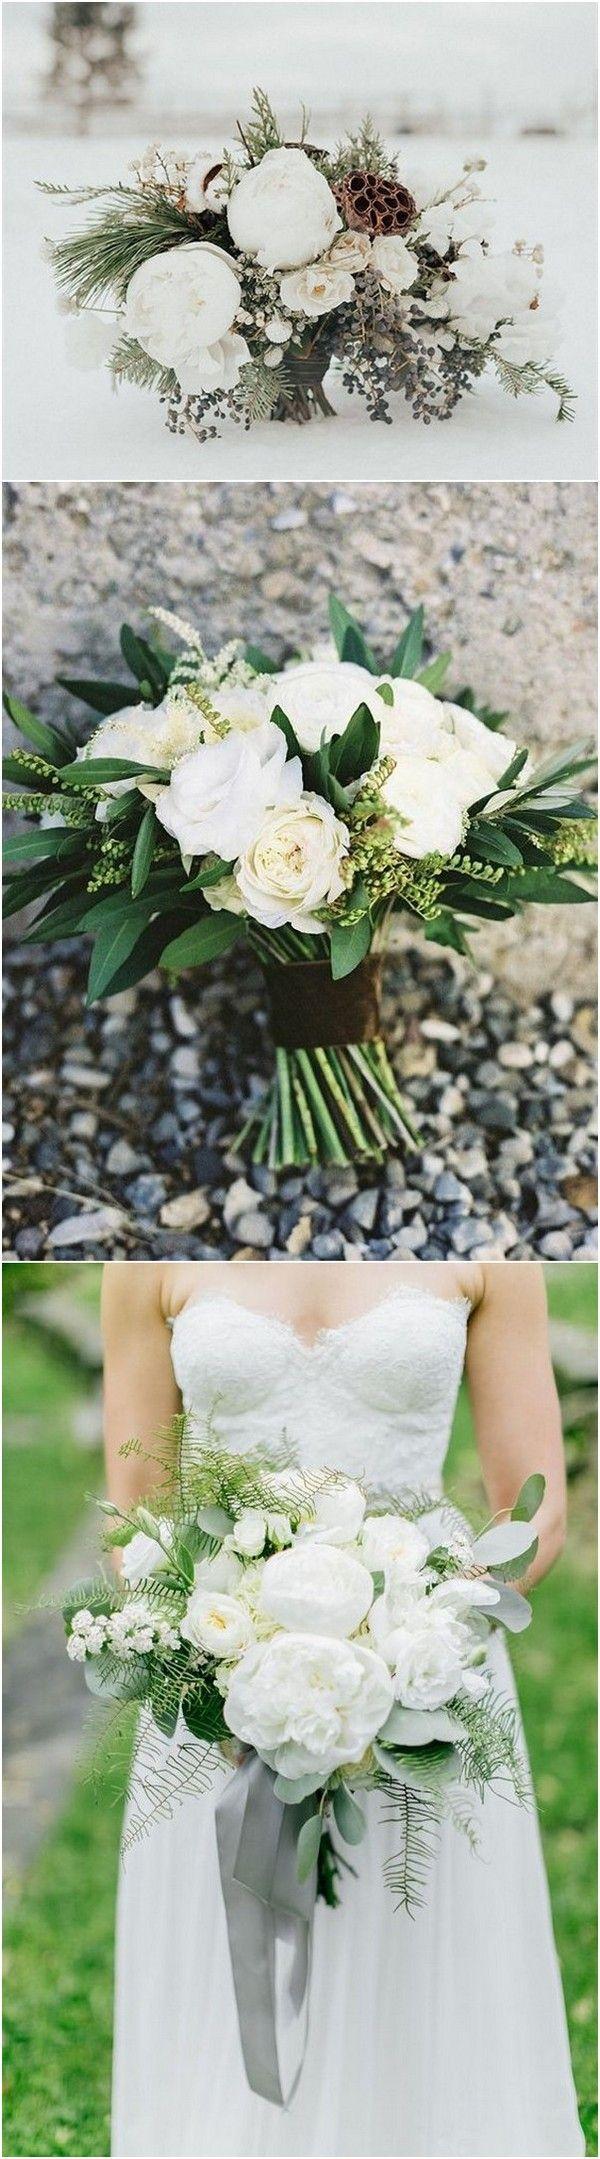 Mariage - 18 Charming Neutral Wedding Bouquets For 2018 Trends - Page 2 Of 2